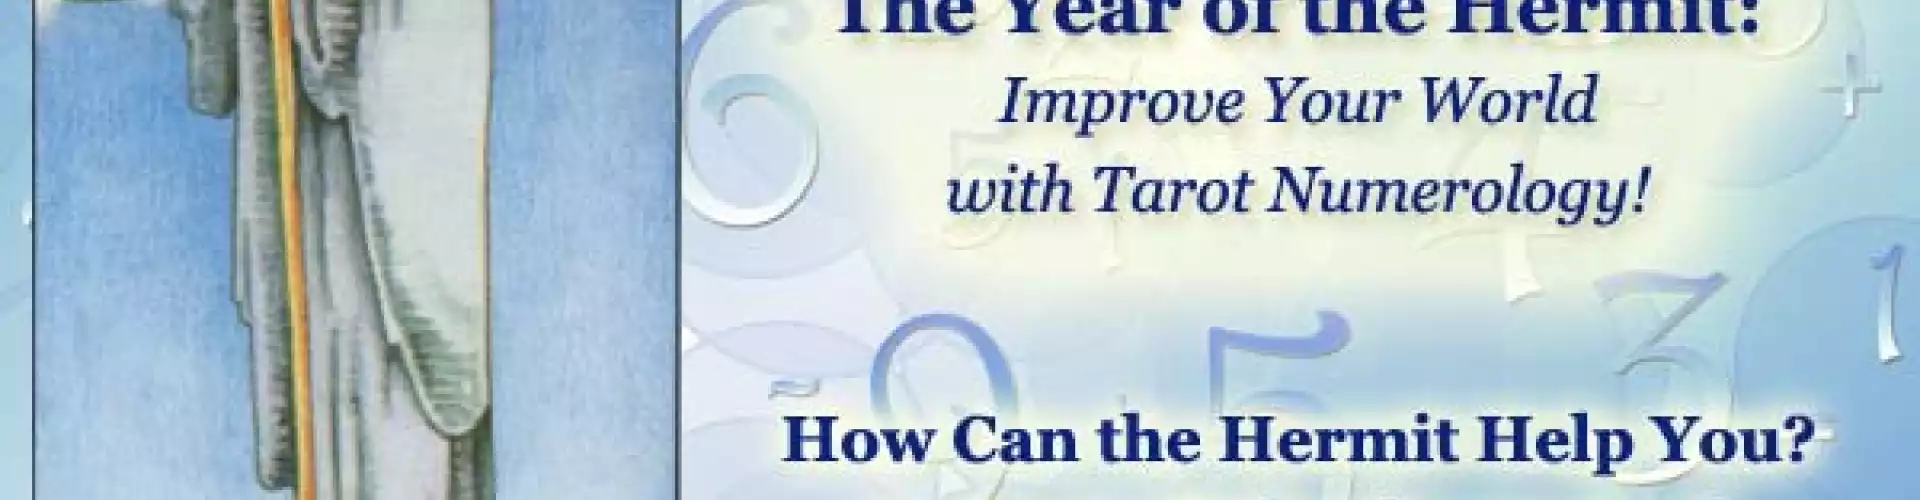 2016 The Year of the Hermit: Improve Your World with Tarot Numerology! 